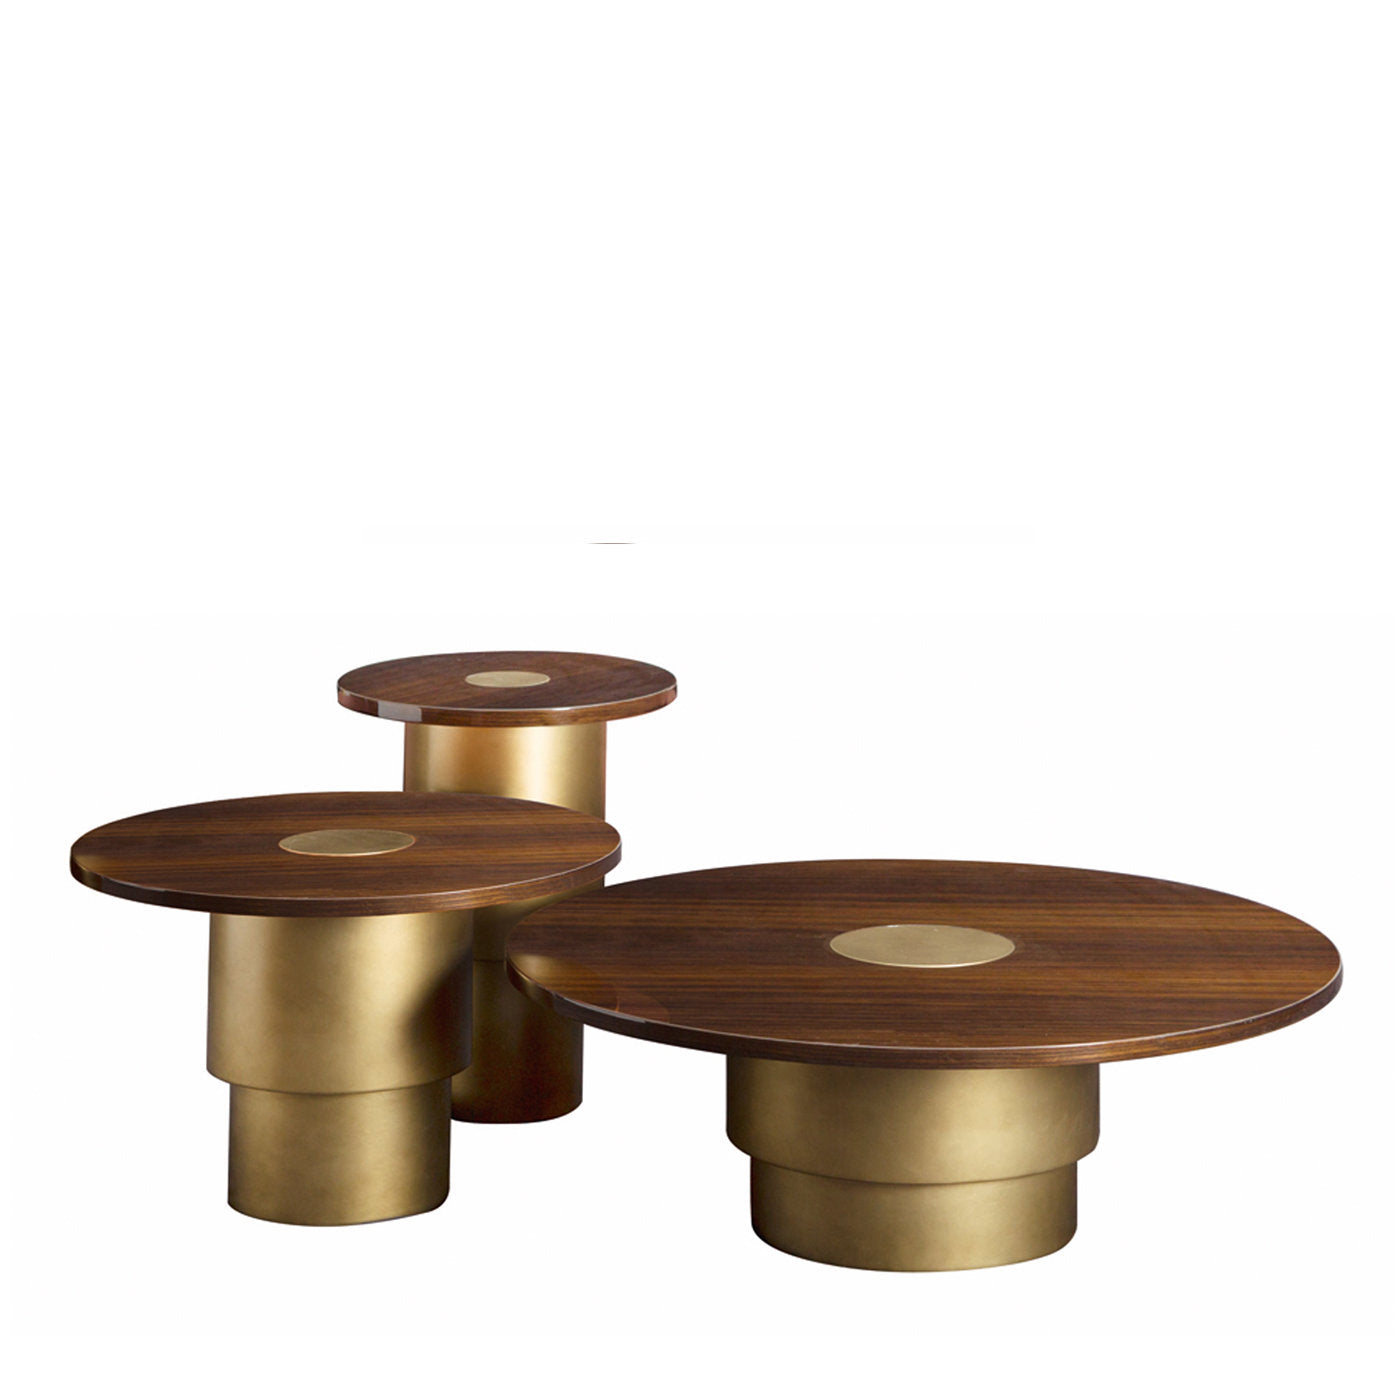 Set of 3 Rondò Nesting Tables - Main view